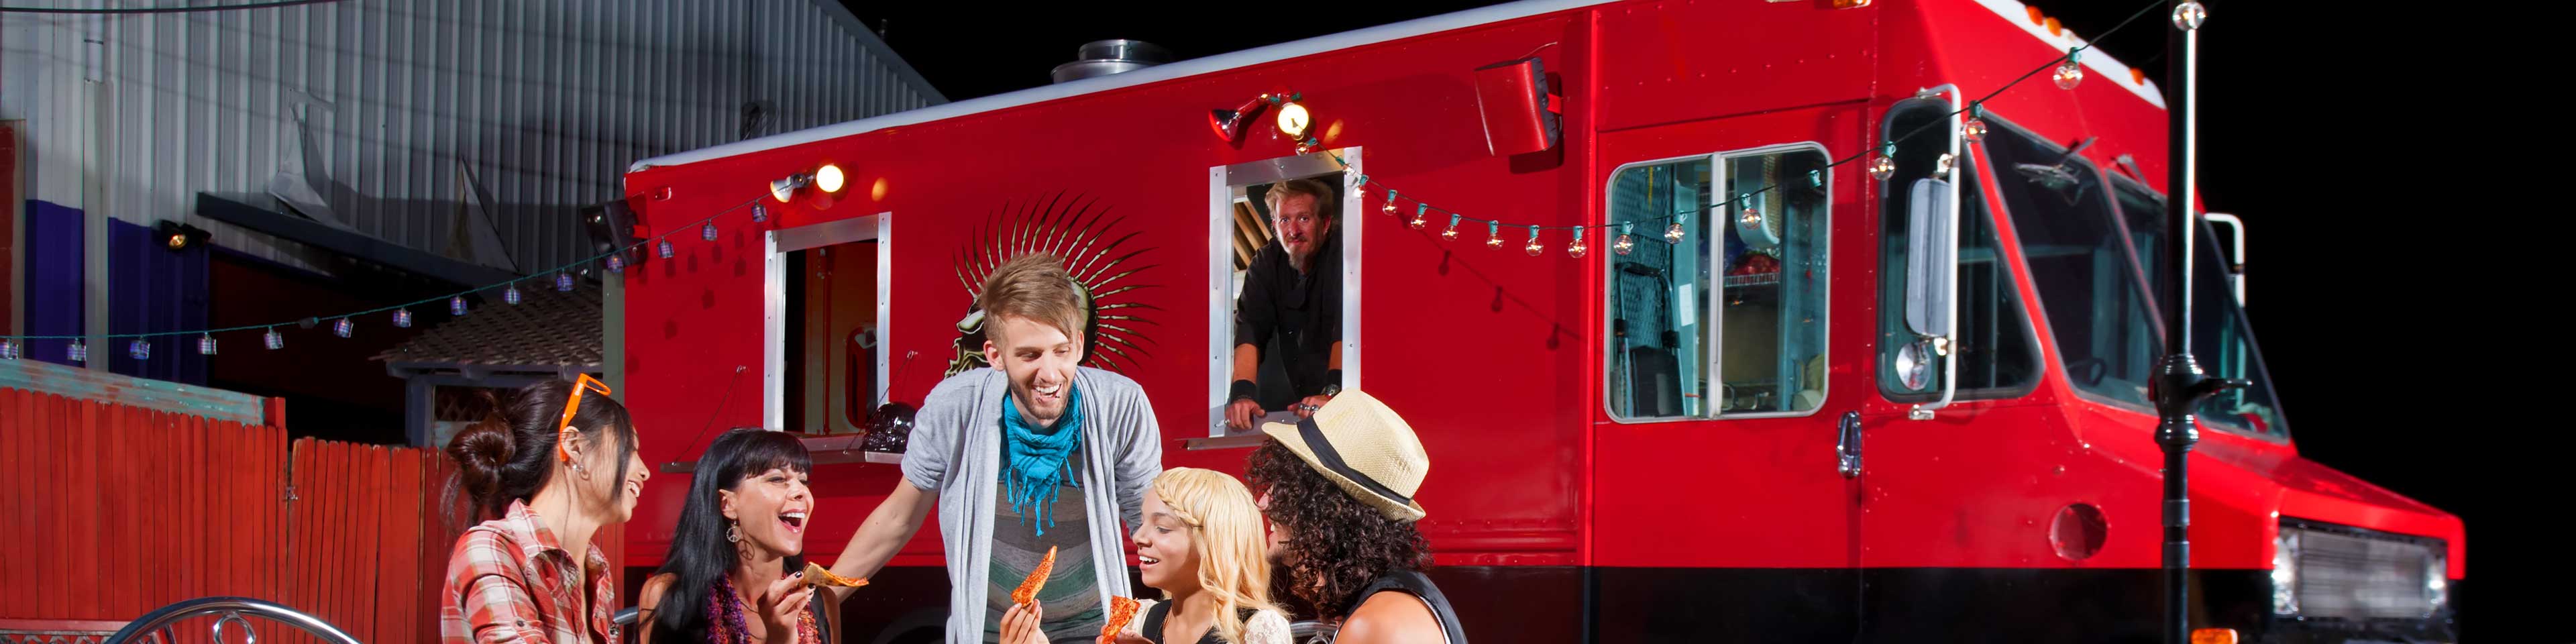 How to start a food truck business: 6 key steps